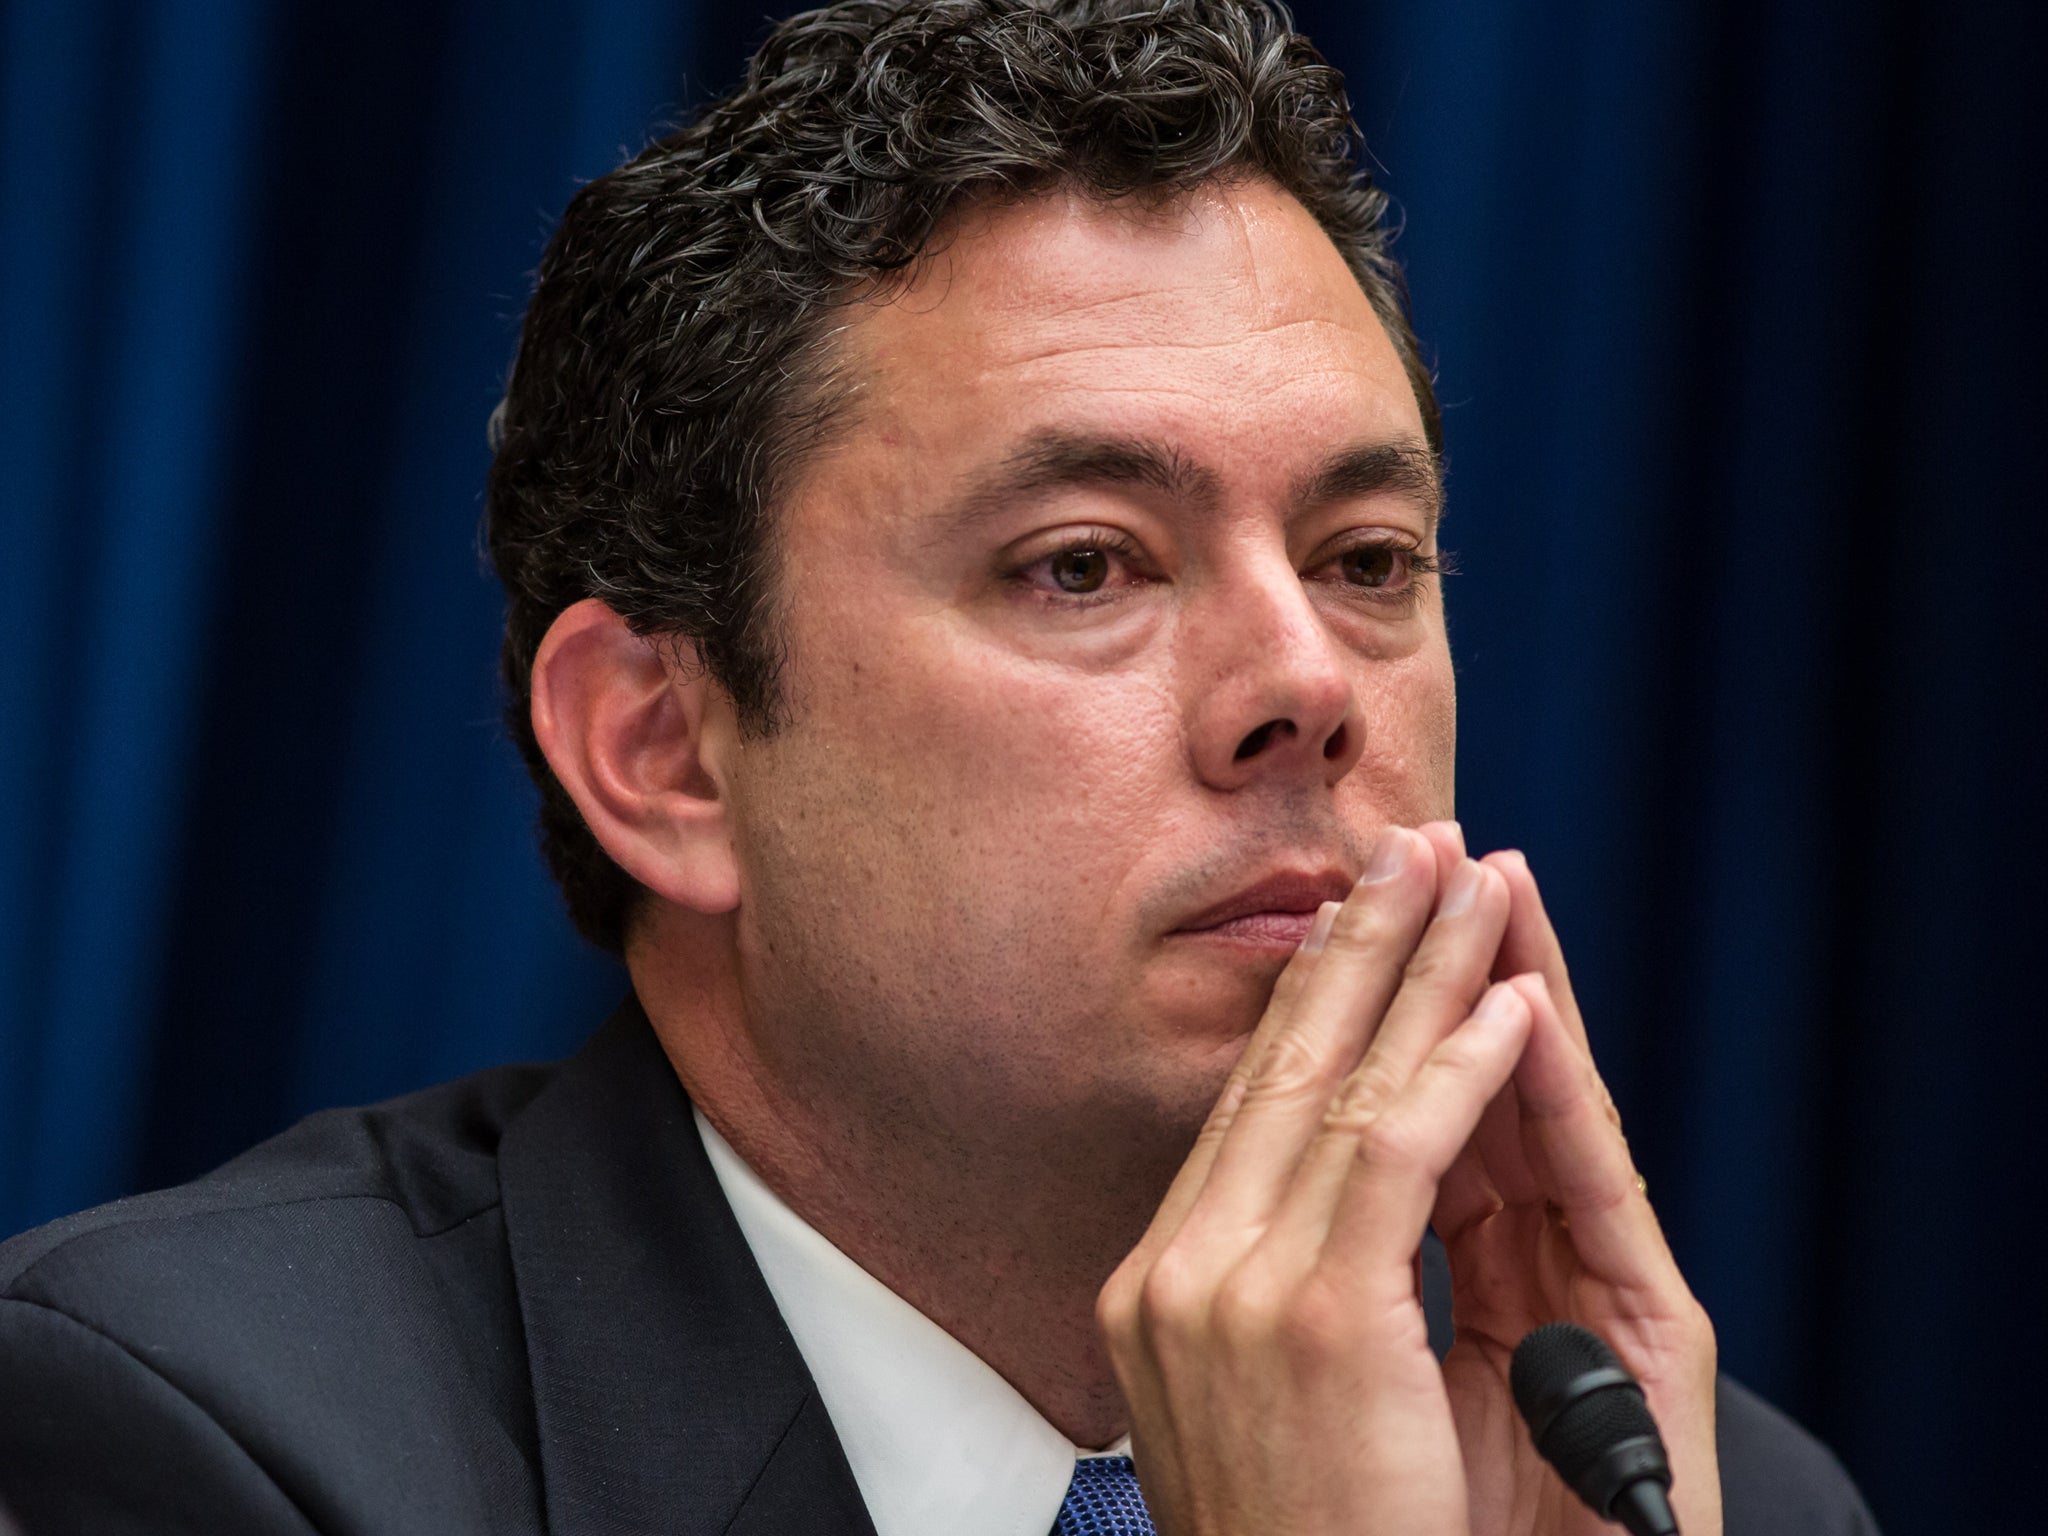 Mr Chaffetz has shown clear resistance to investigating alleged corruption and controversy in his own administration